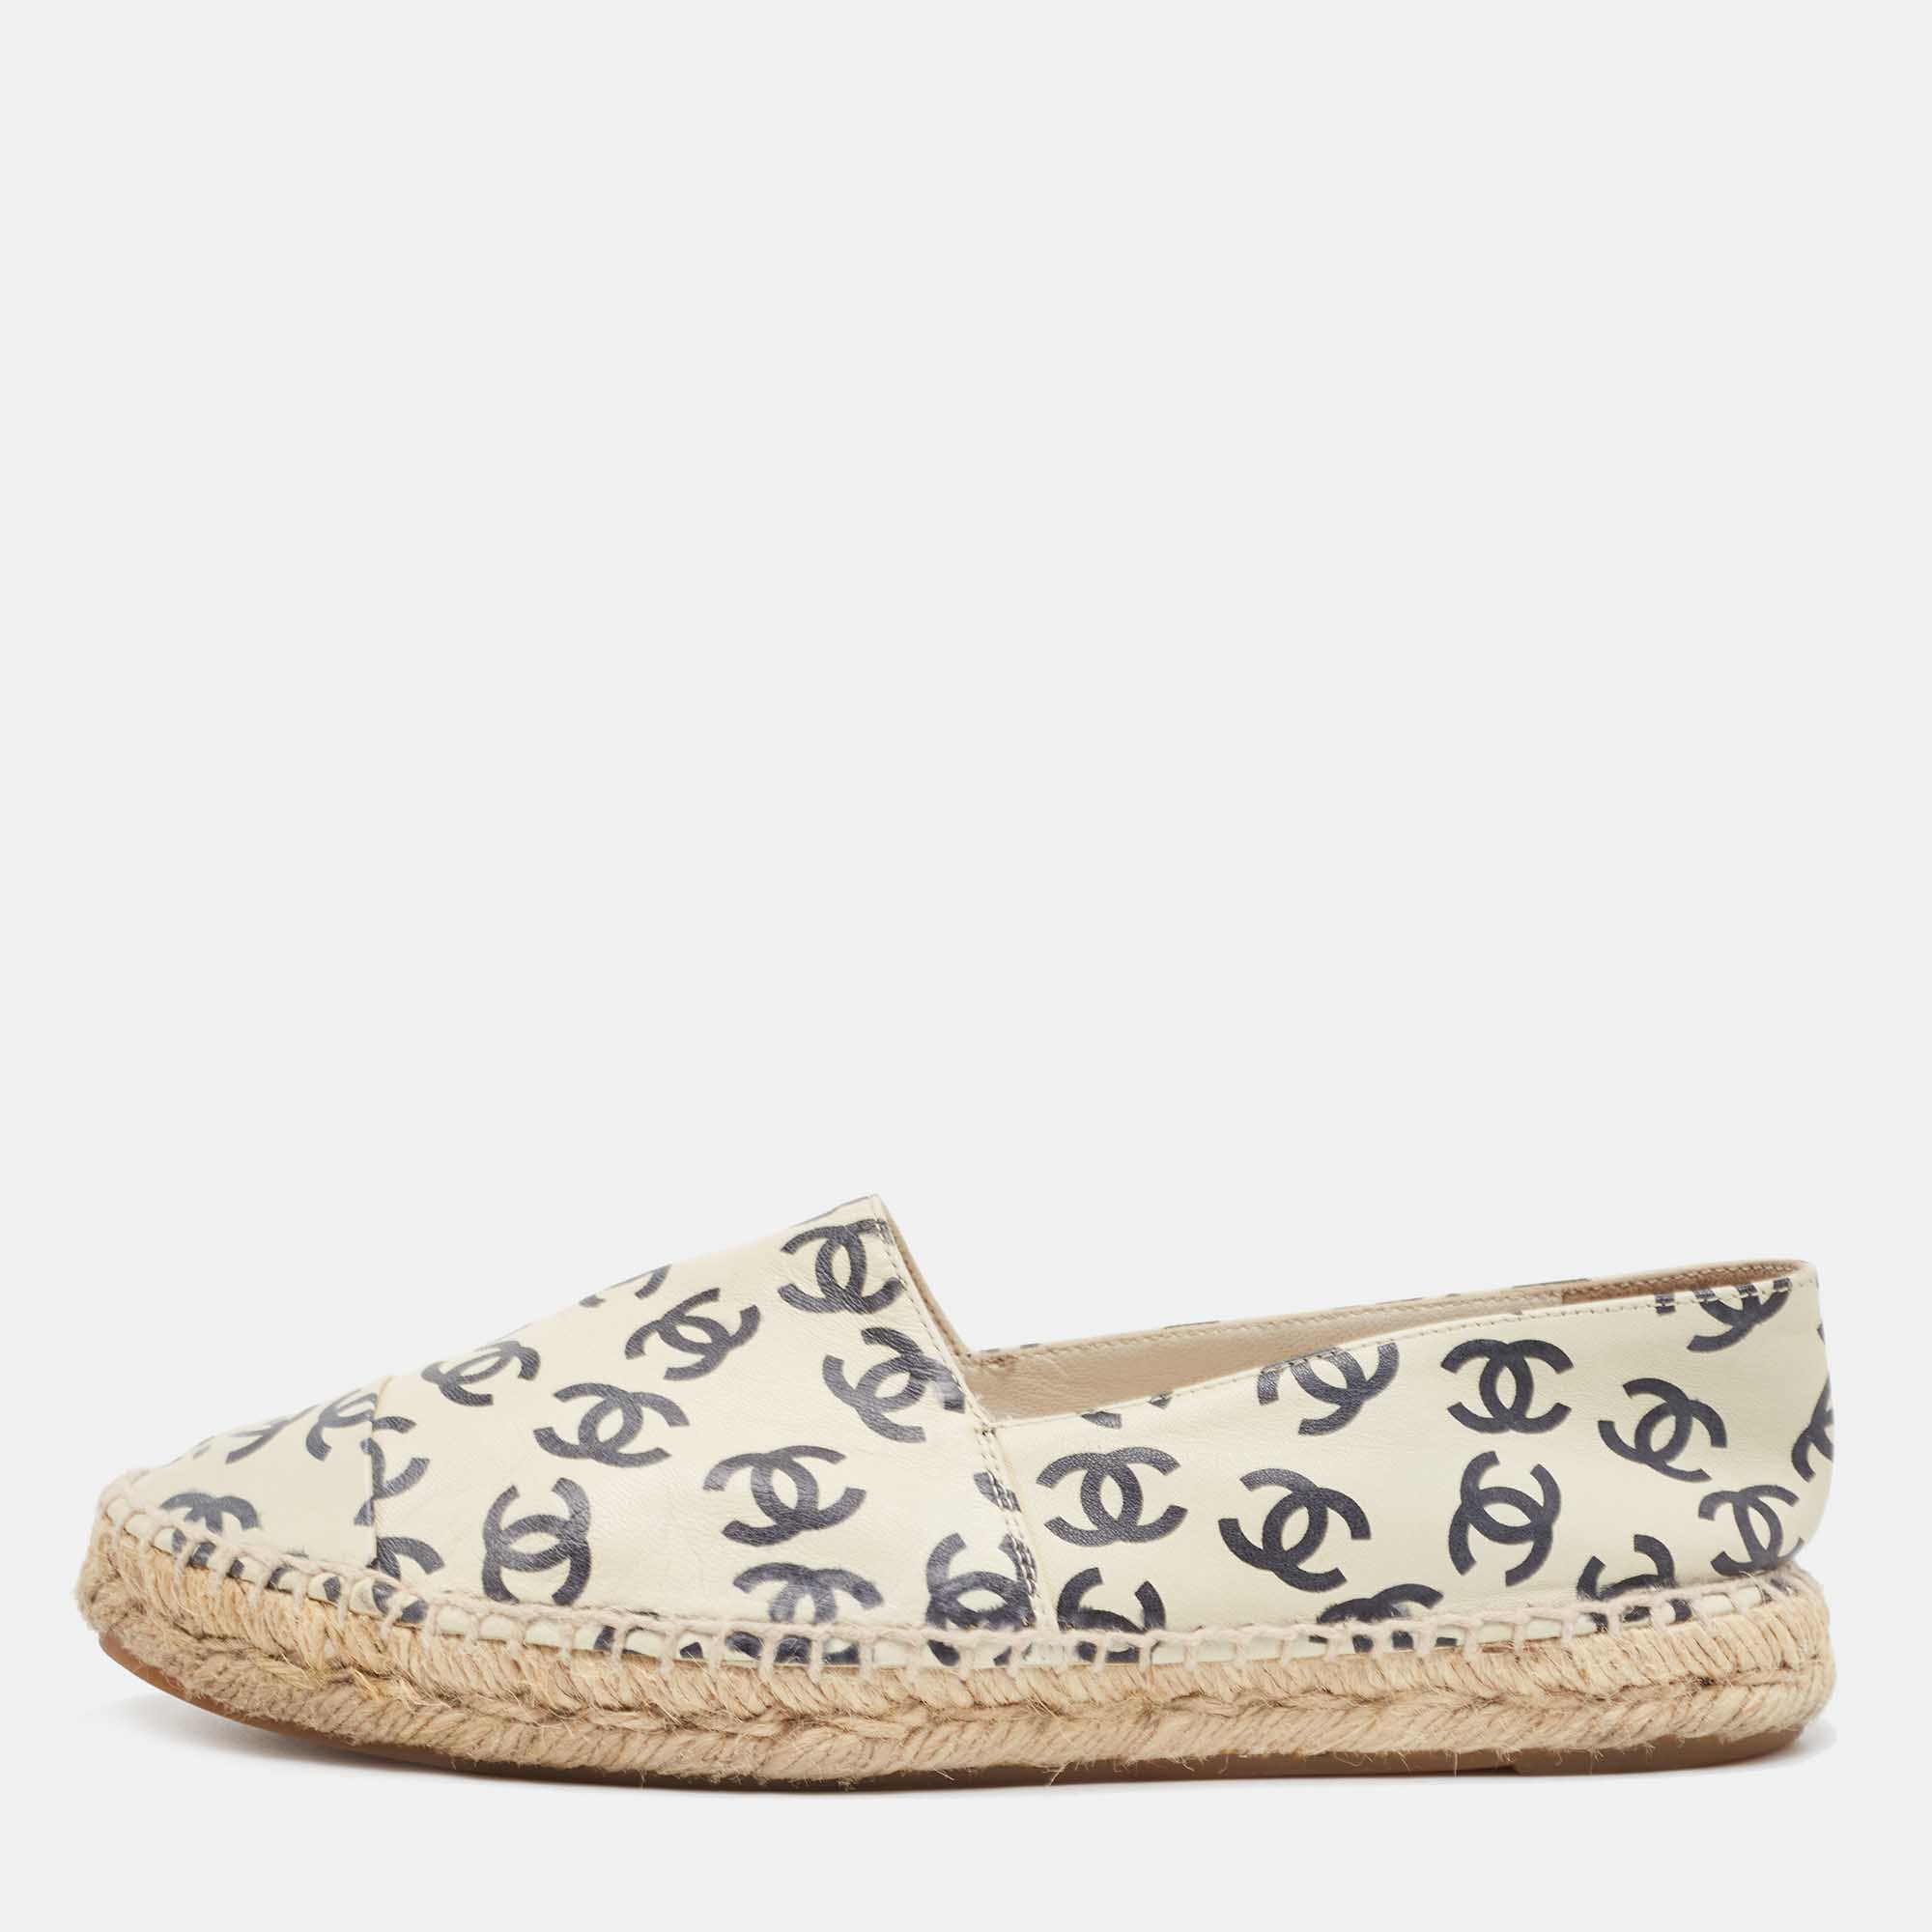 Chanel Women's CC Espadrilles Printed Mesh with Leather Black 141768387